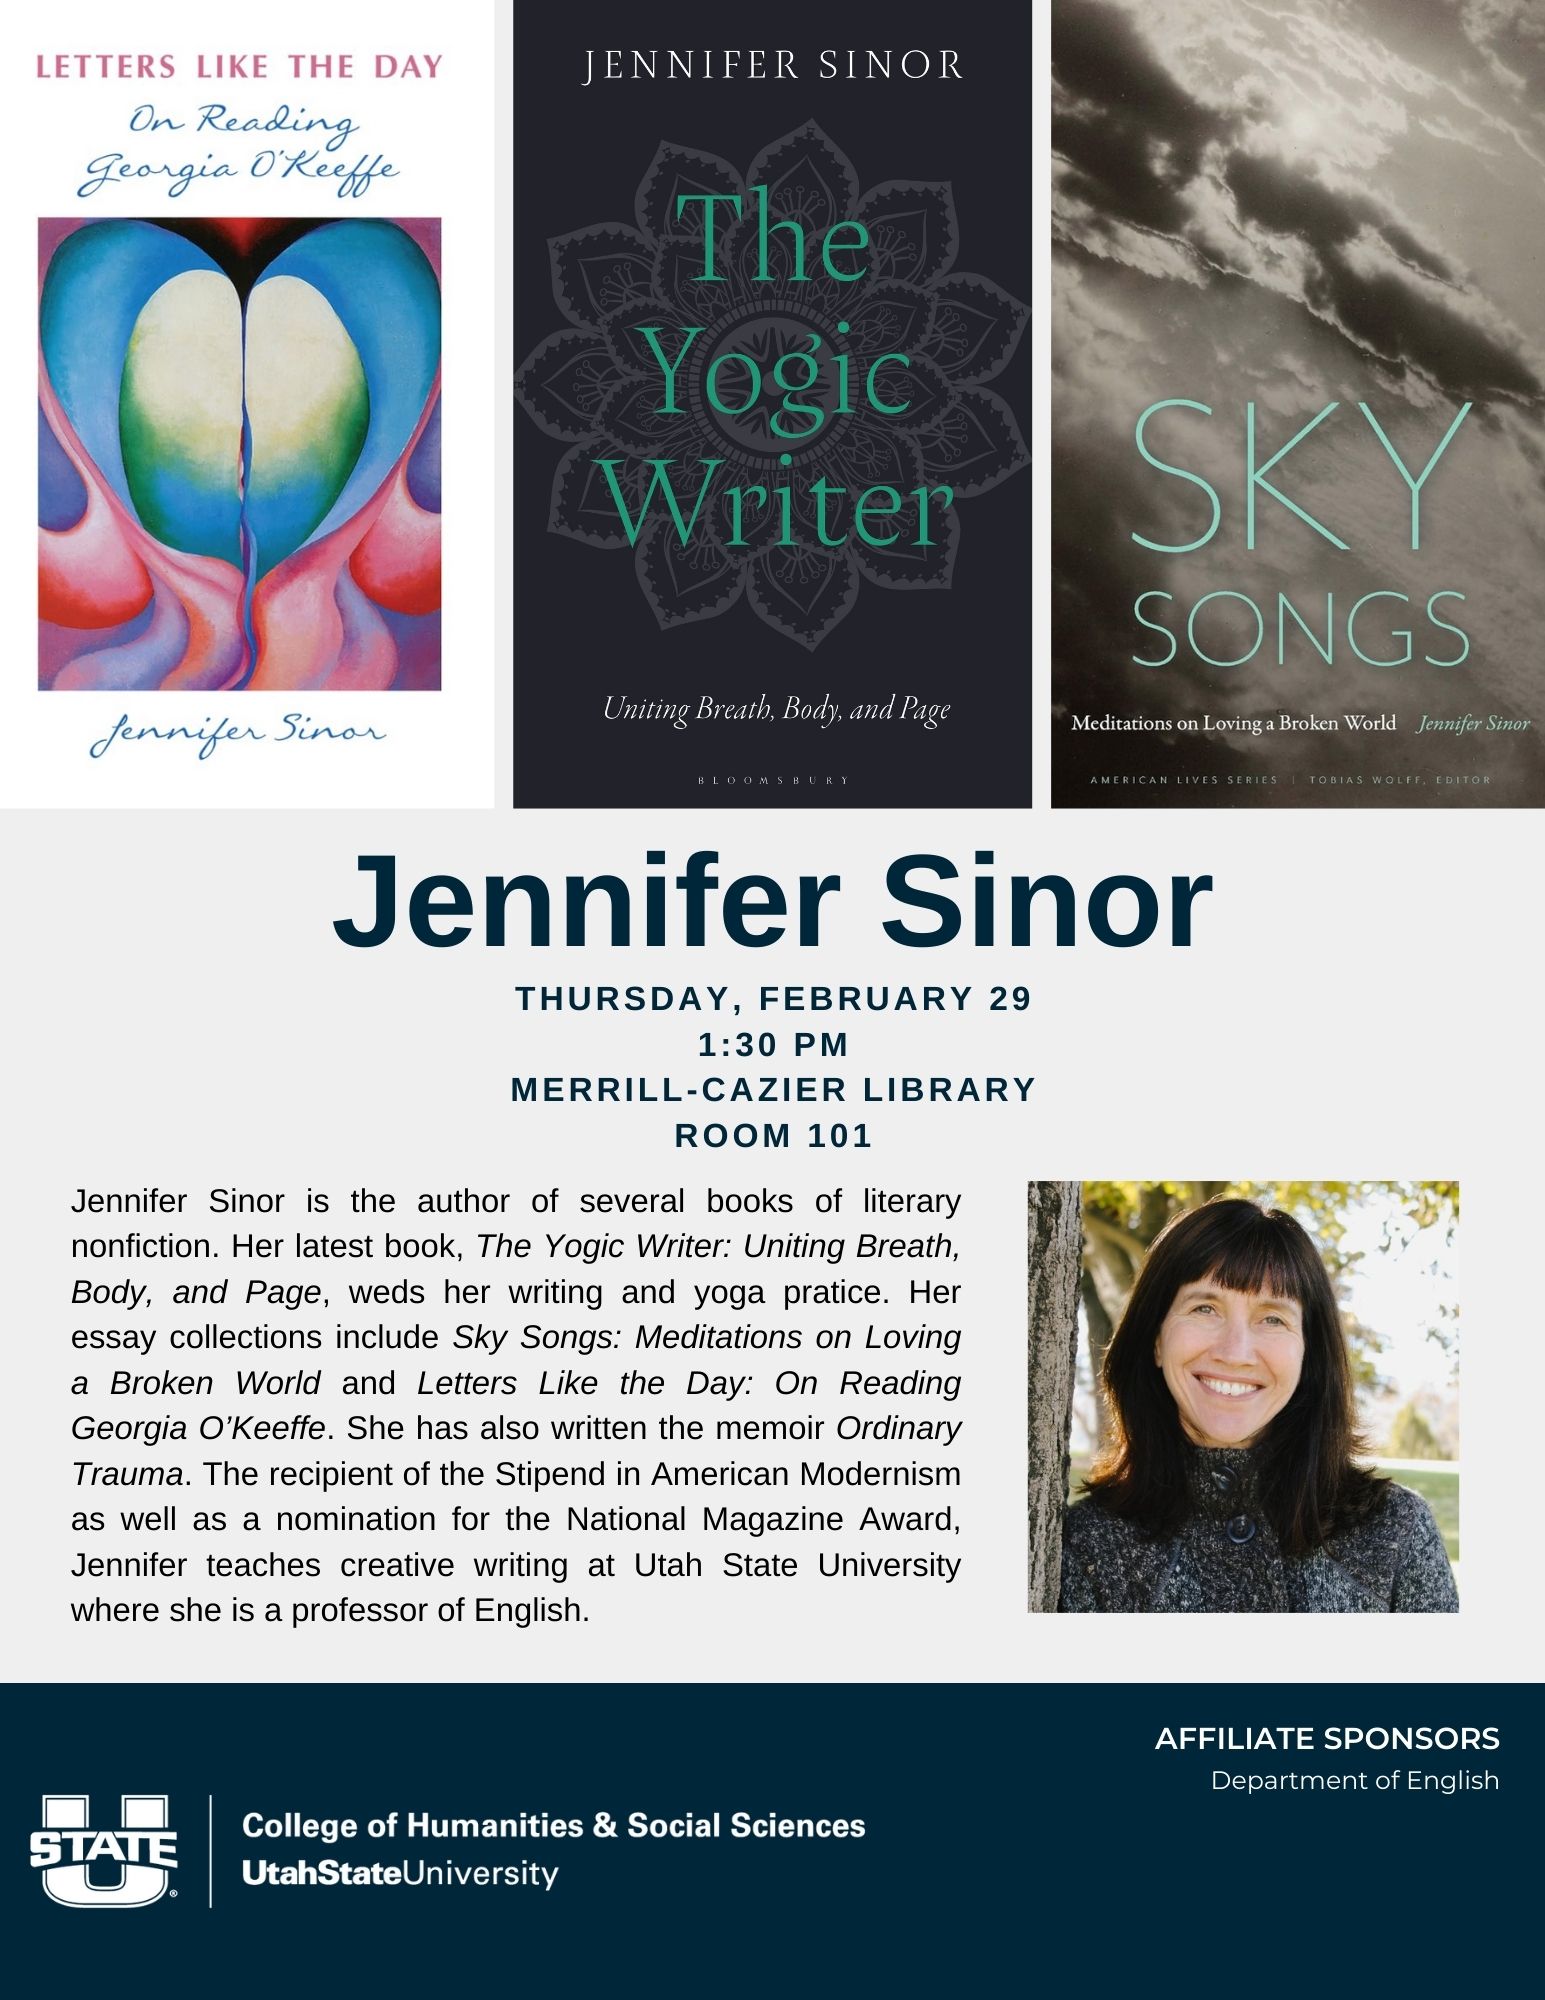 Image of Jennifer Sinor along with bio and event details and images of three of the books she's written: Letters Like the Day, The Yogic Writer, and Sky Songs